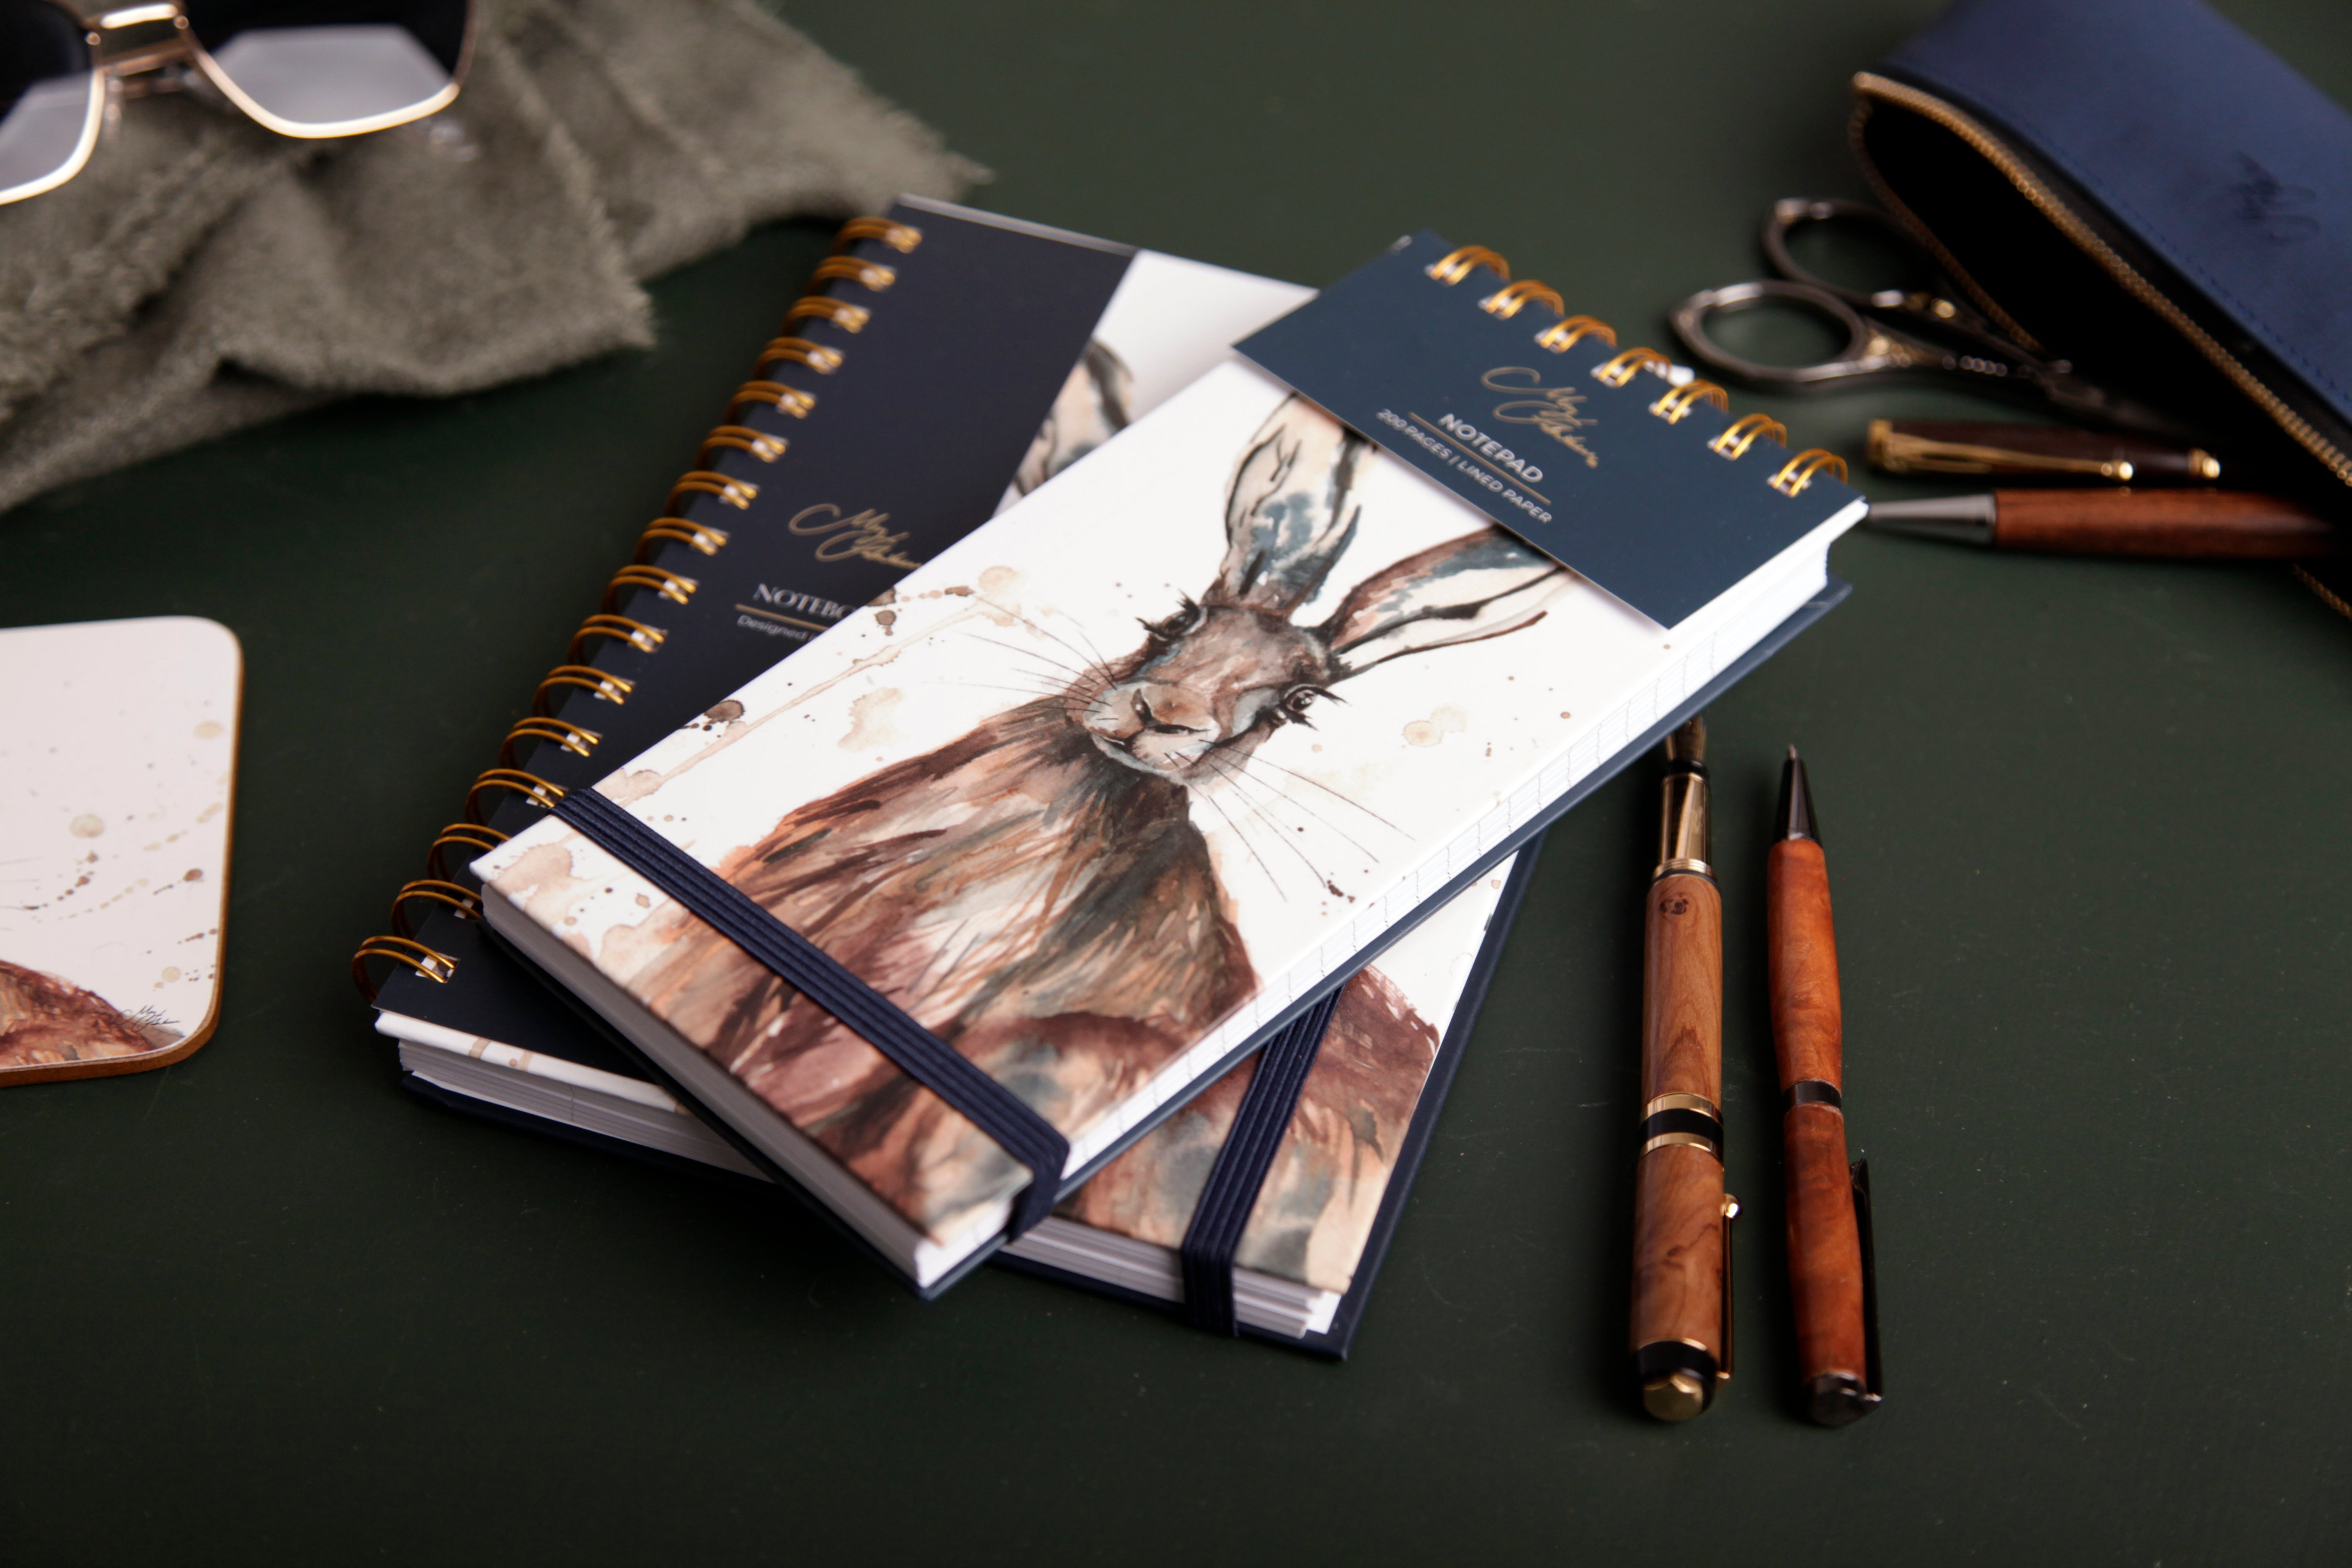 The Meadow Hare Watercolour Design A5 Notebook